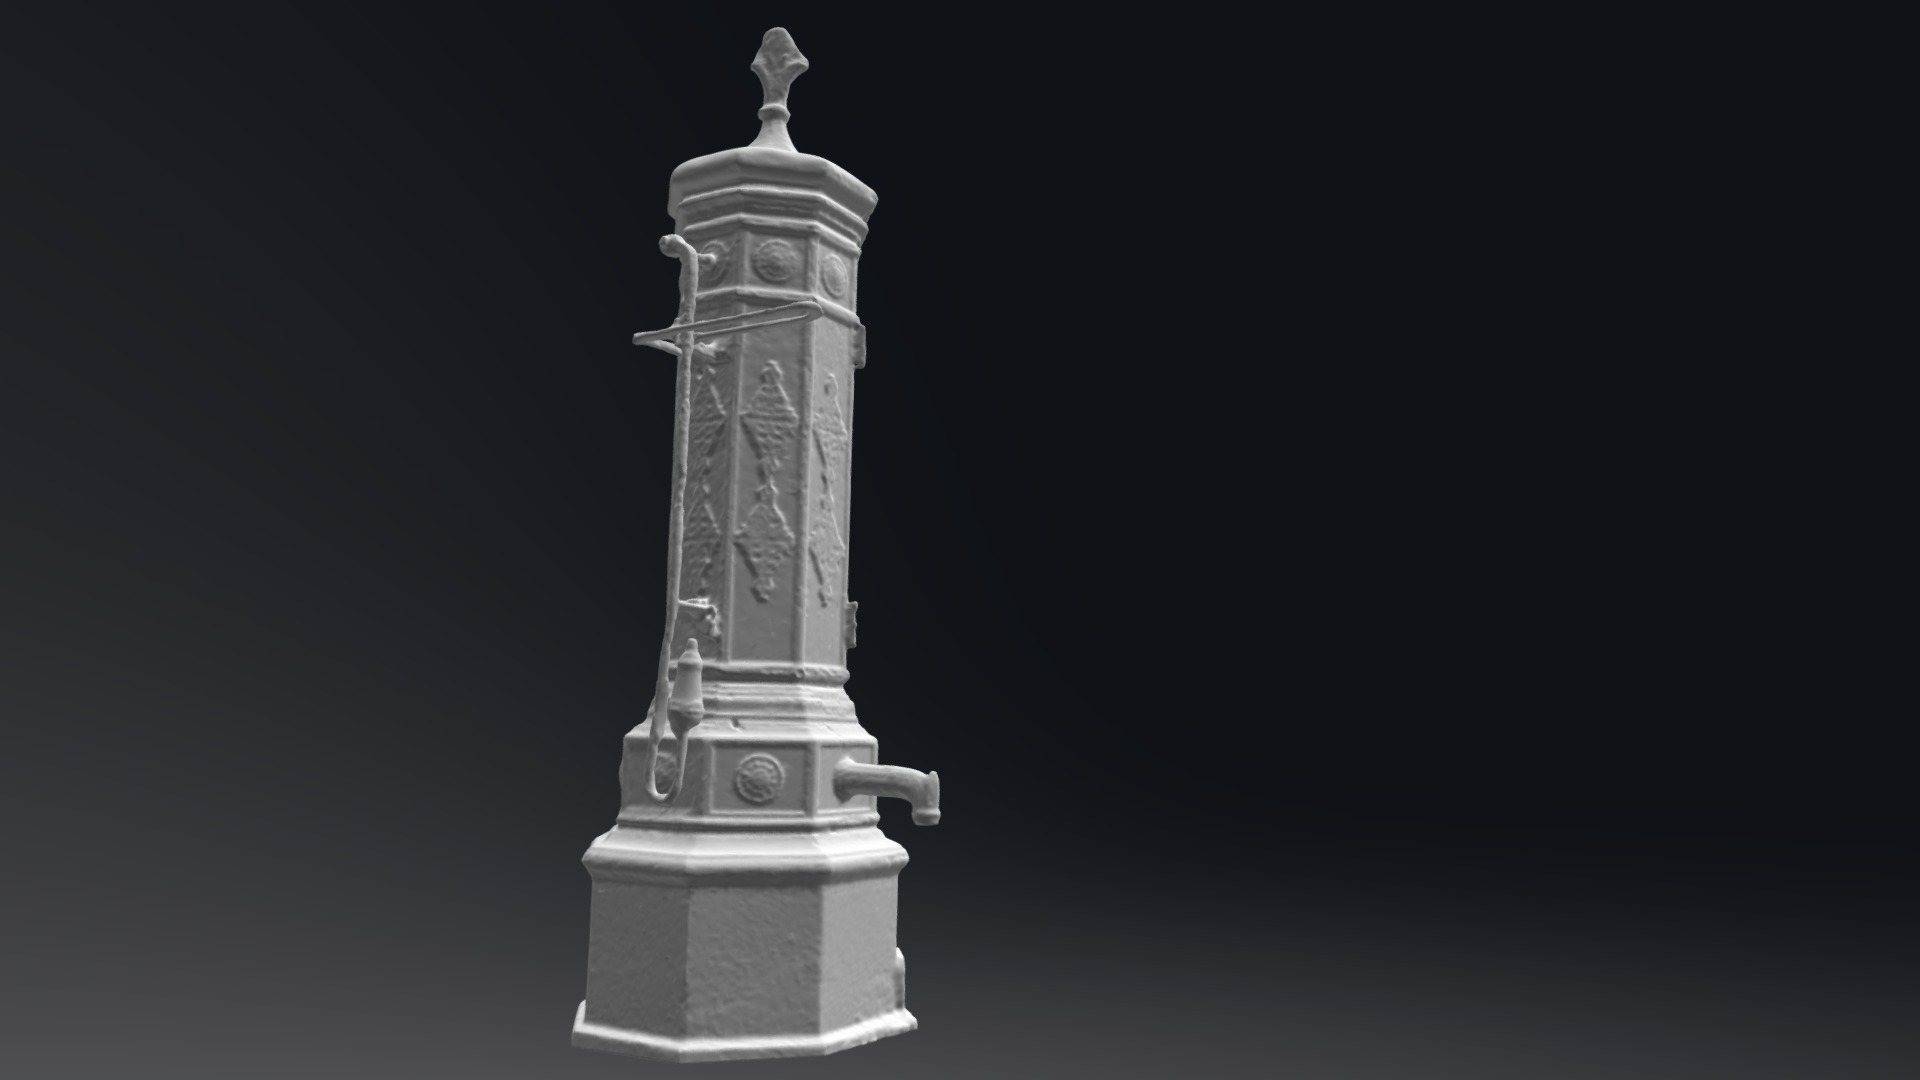 3D model Waterpomp Huisen - This is a 3D model of the Waterpomp Huisen. The 3D model is about a metal tower with a statue on top.